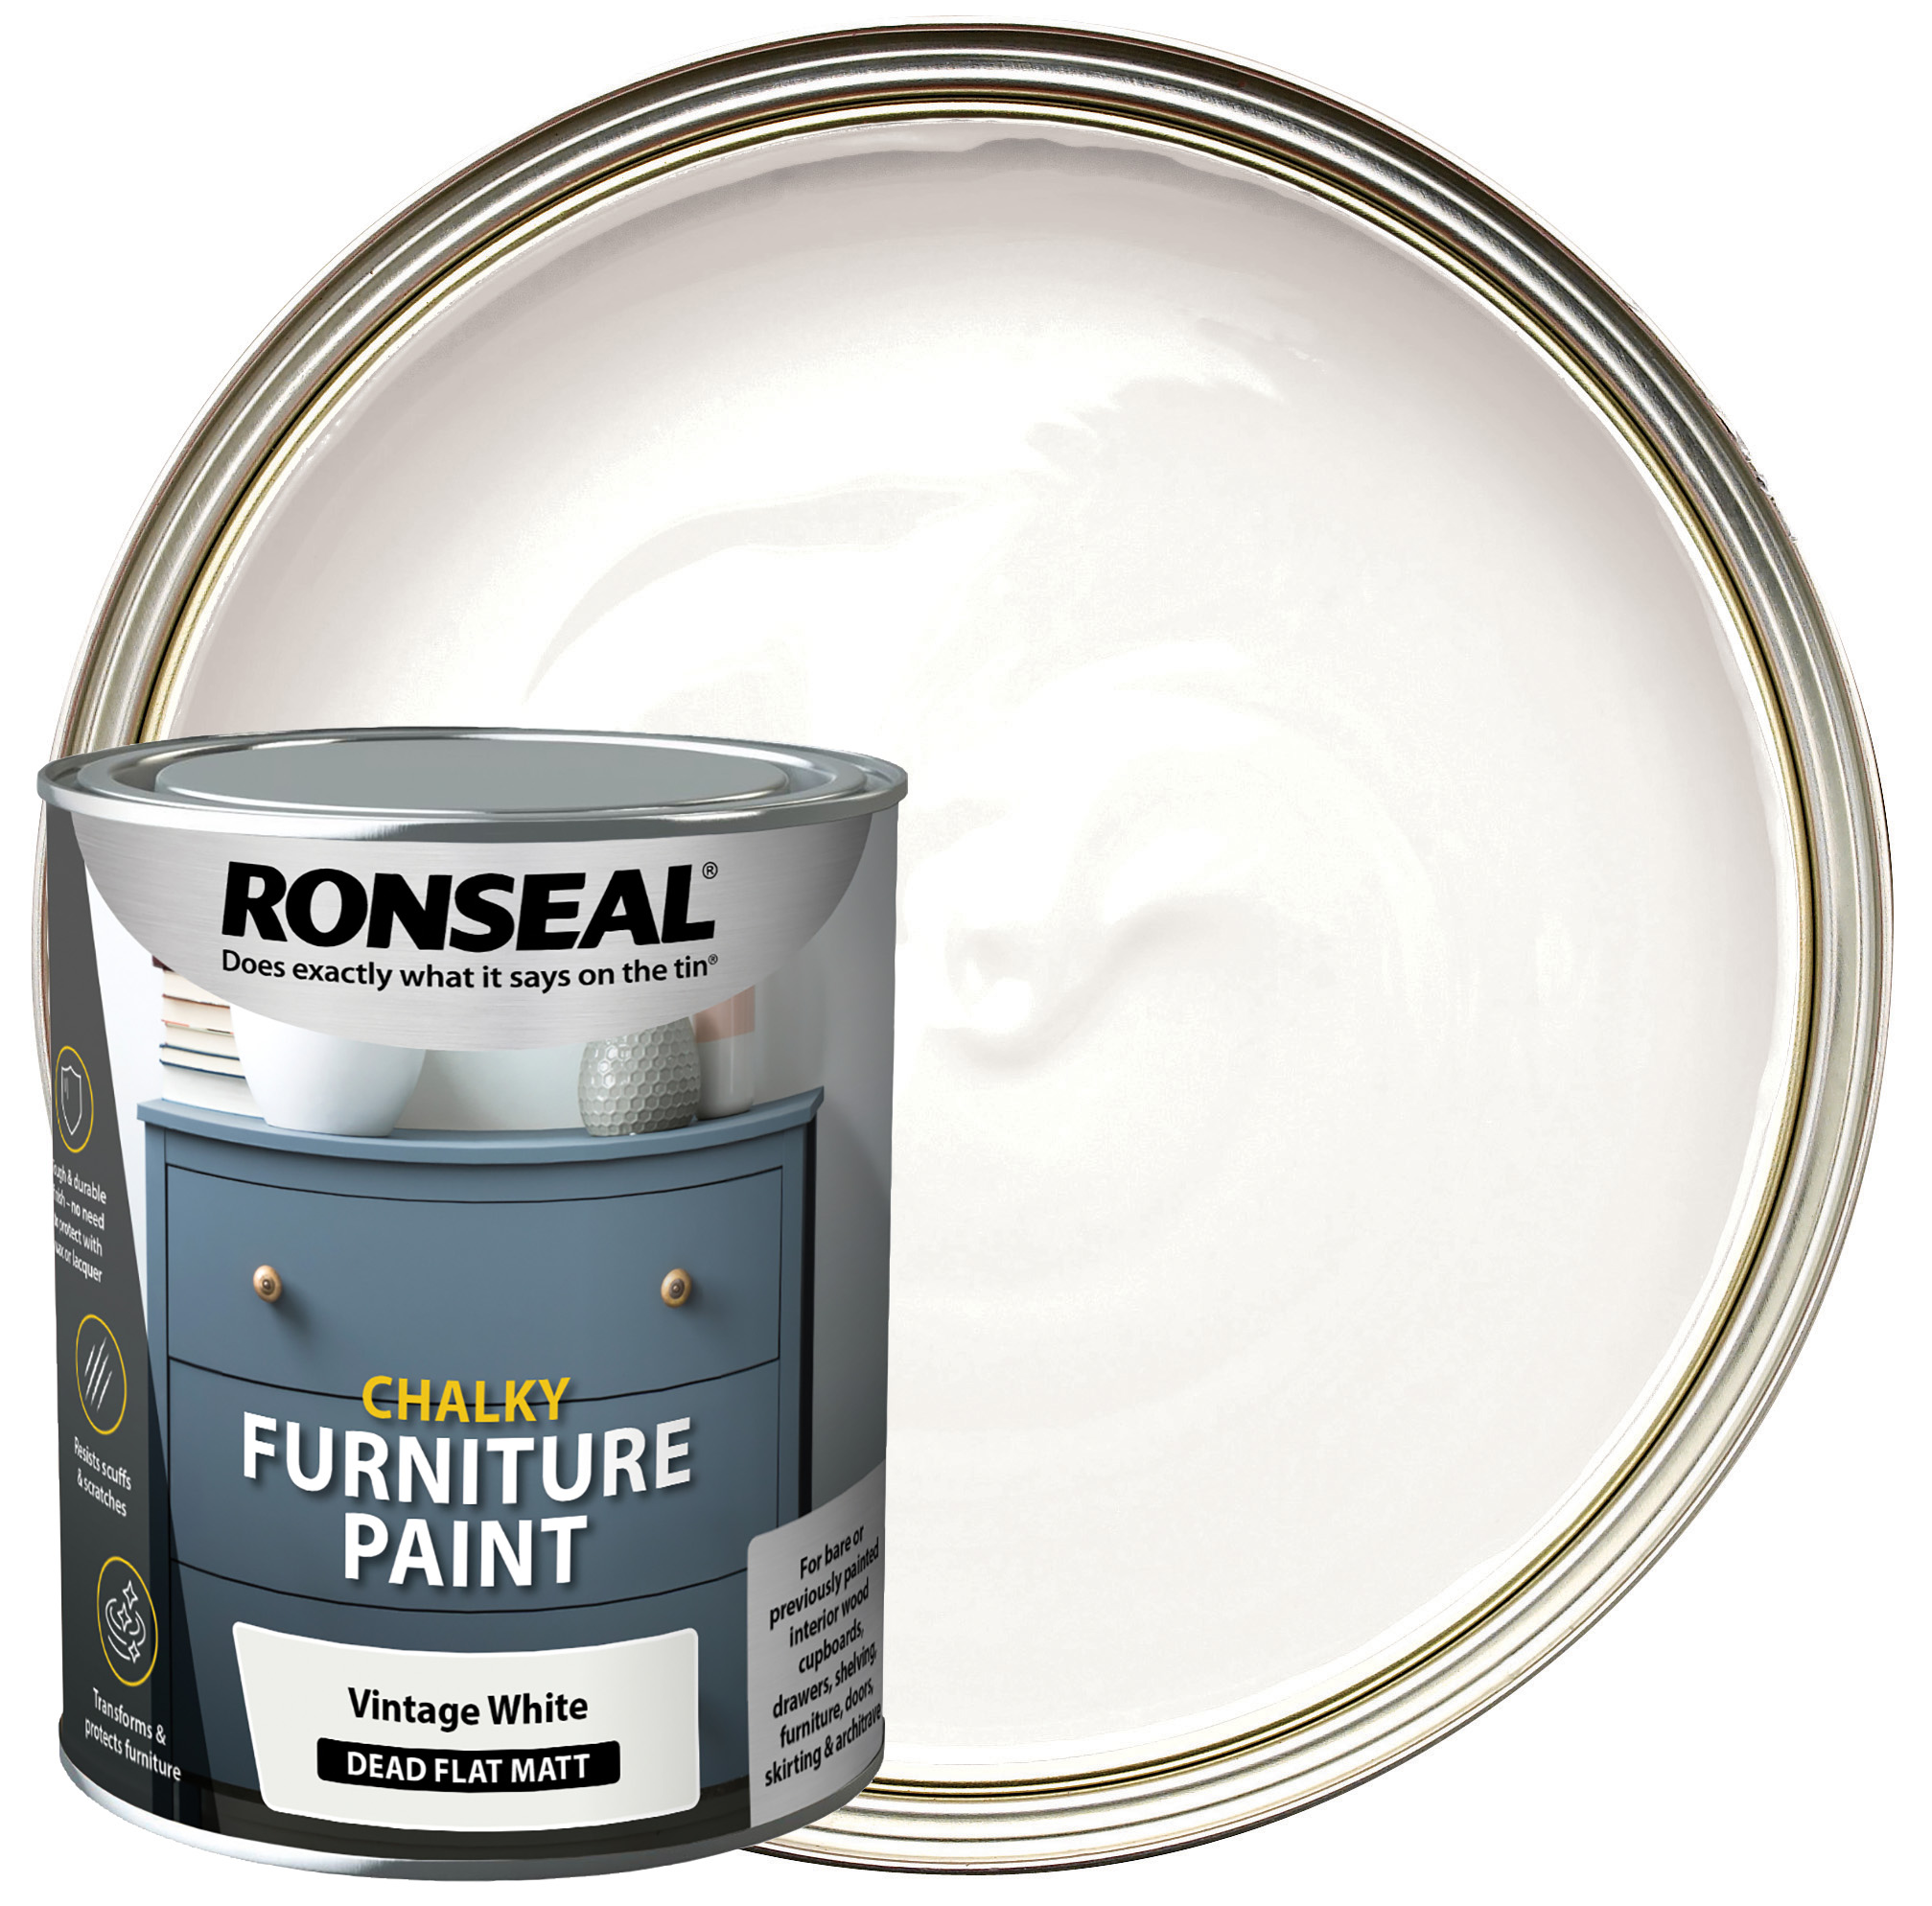 Ronseal Chalky Furniture Paint - Vintage White - 750ml